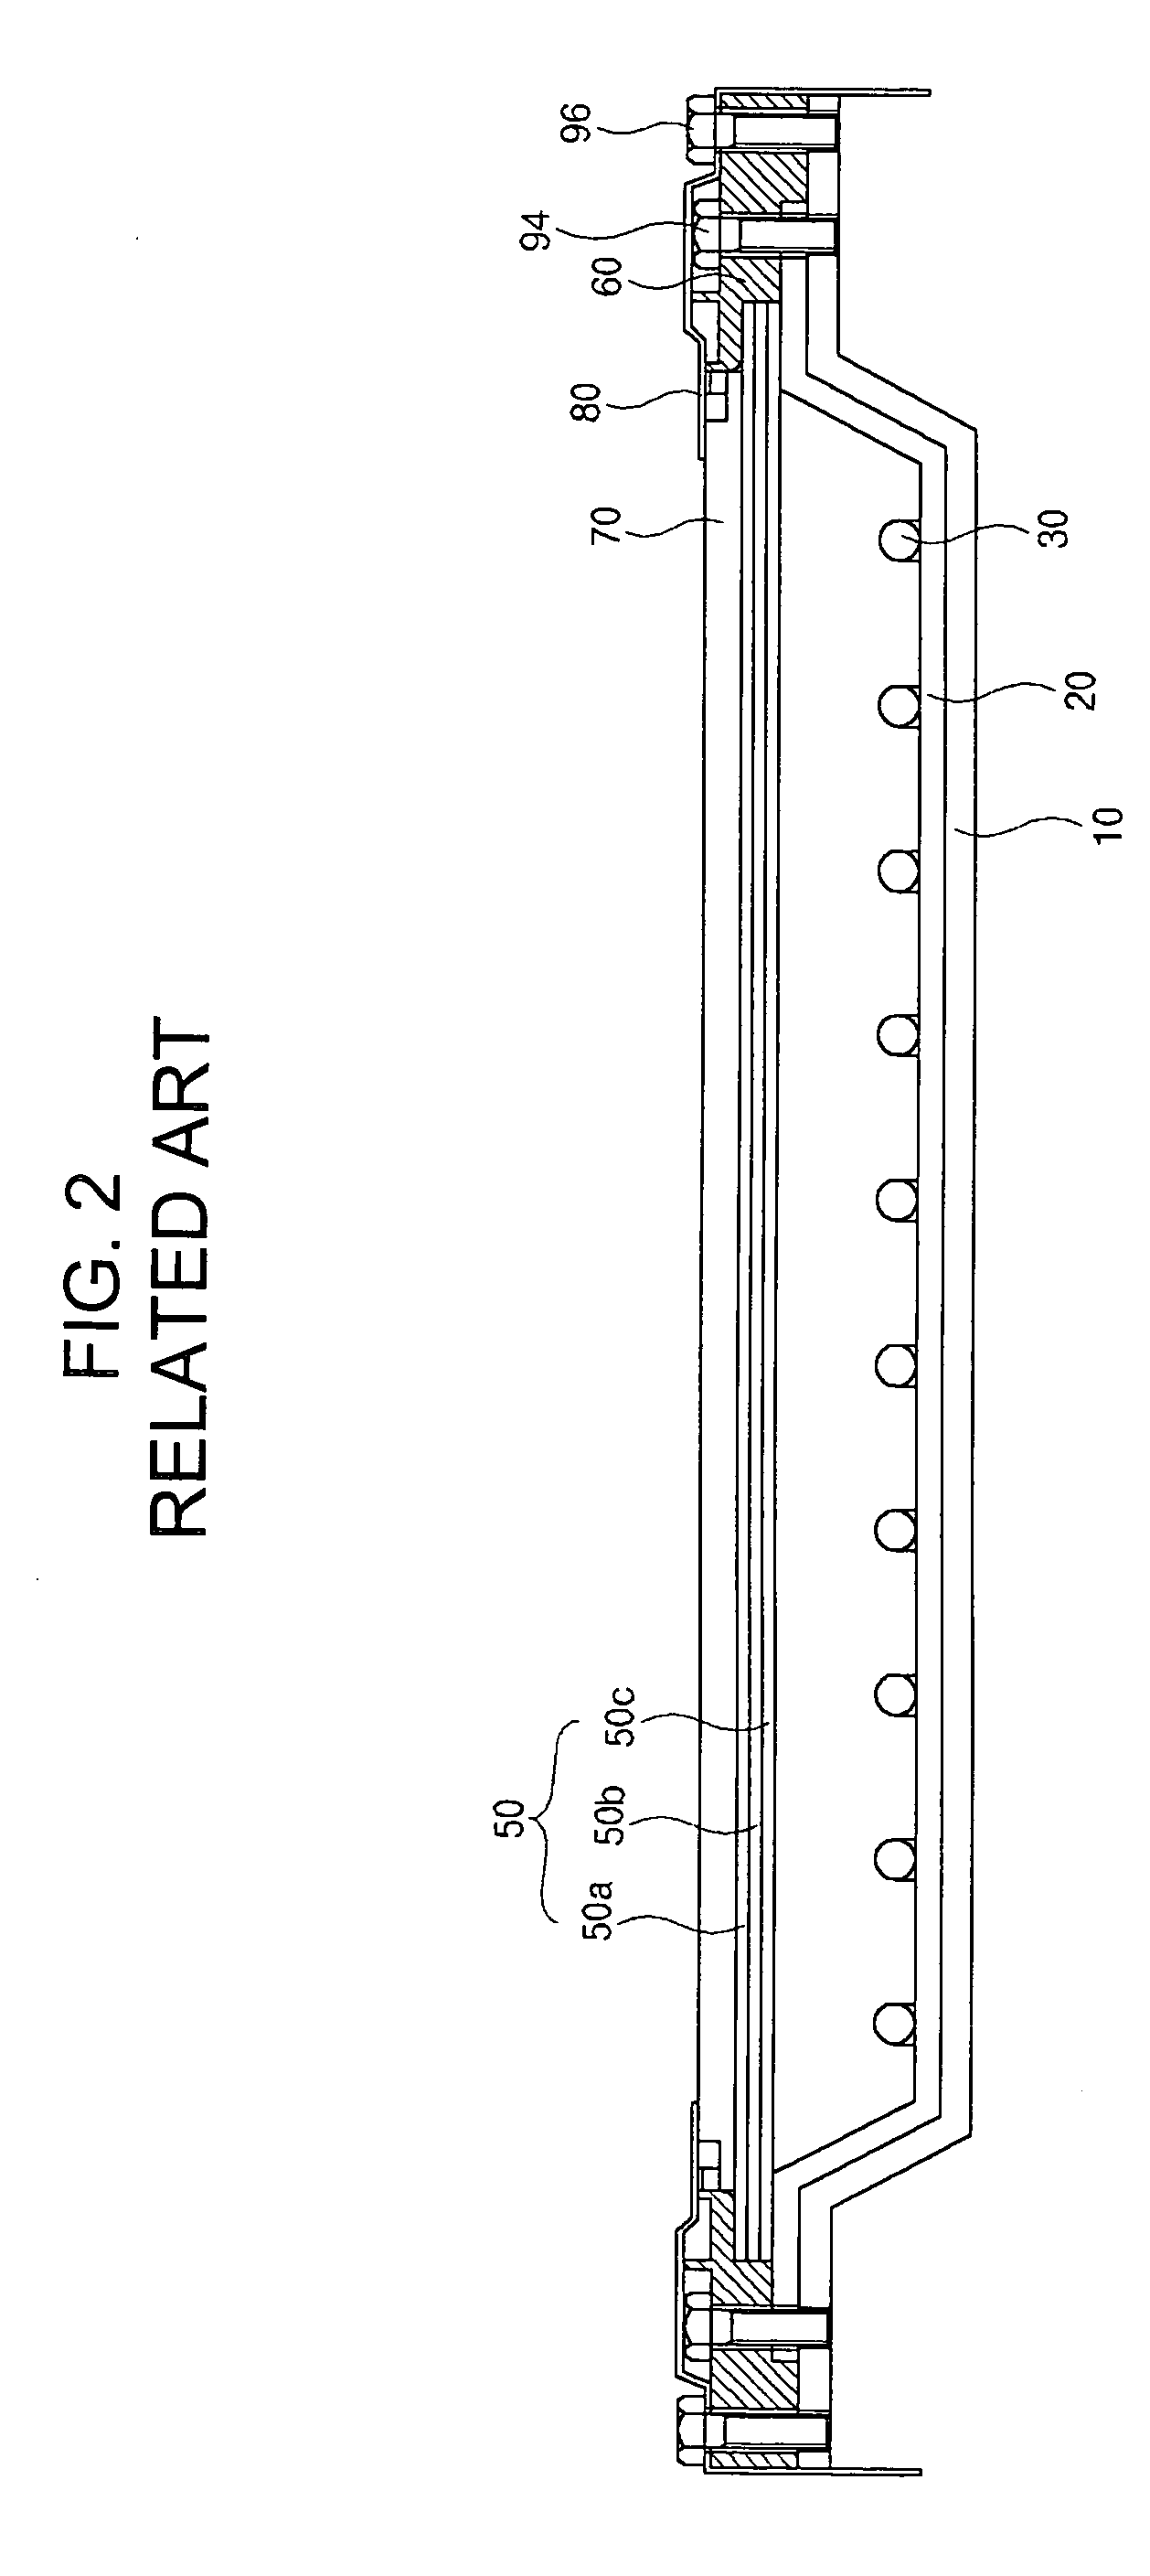 Backlight unit, liquid crystal display device using the same, and method of fabricating the same